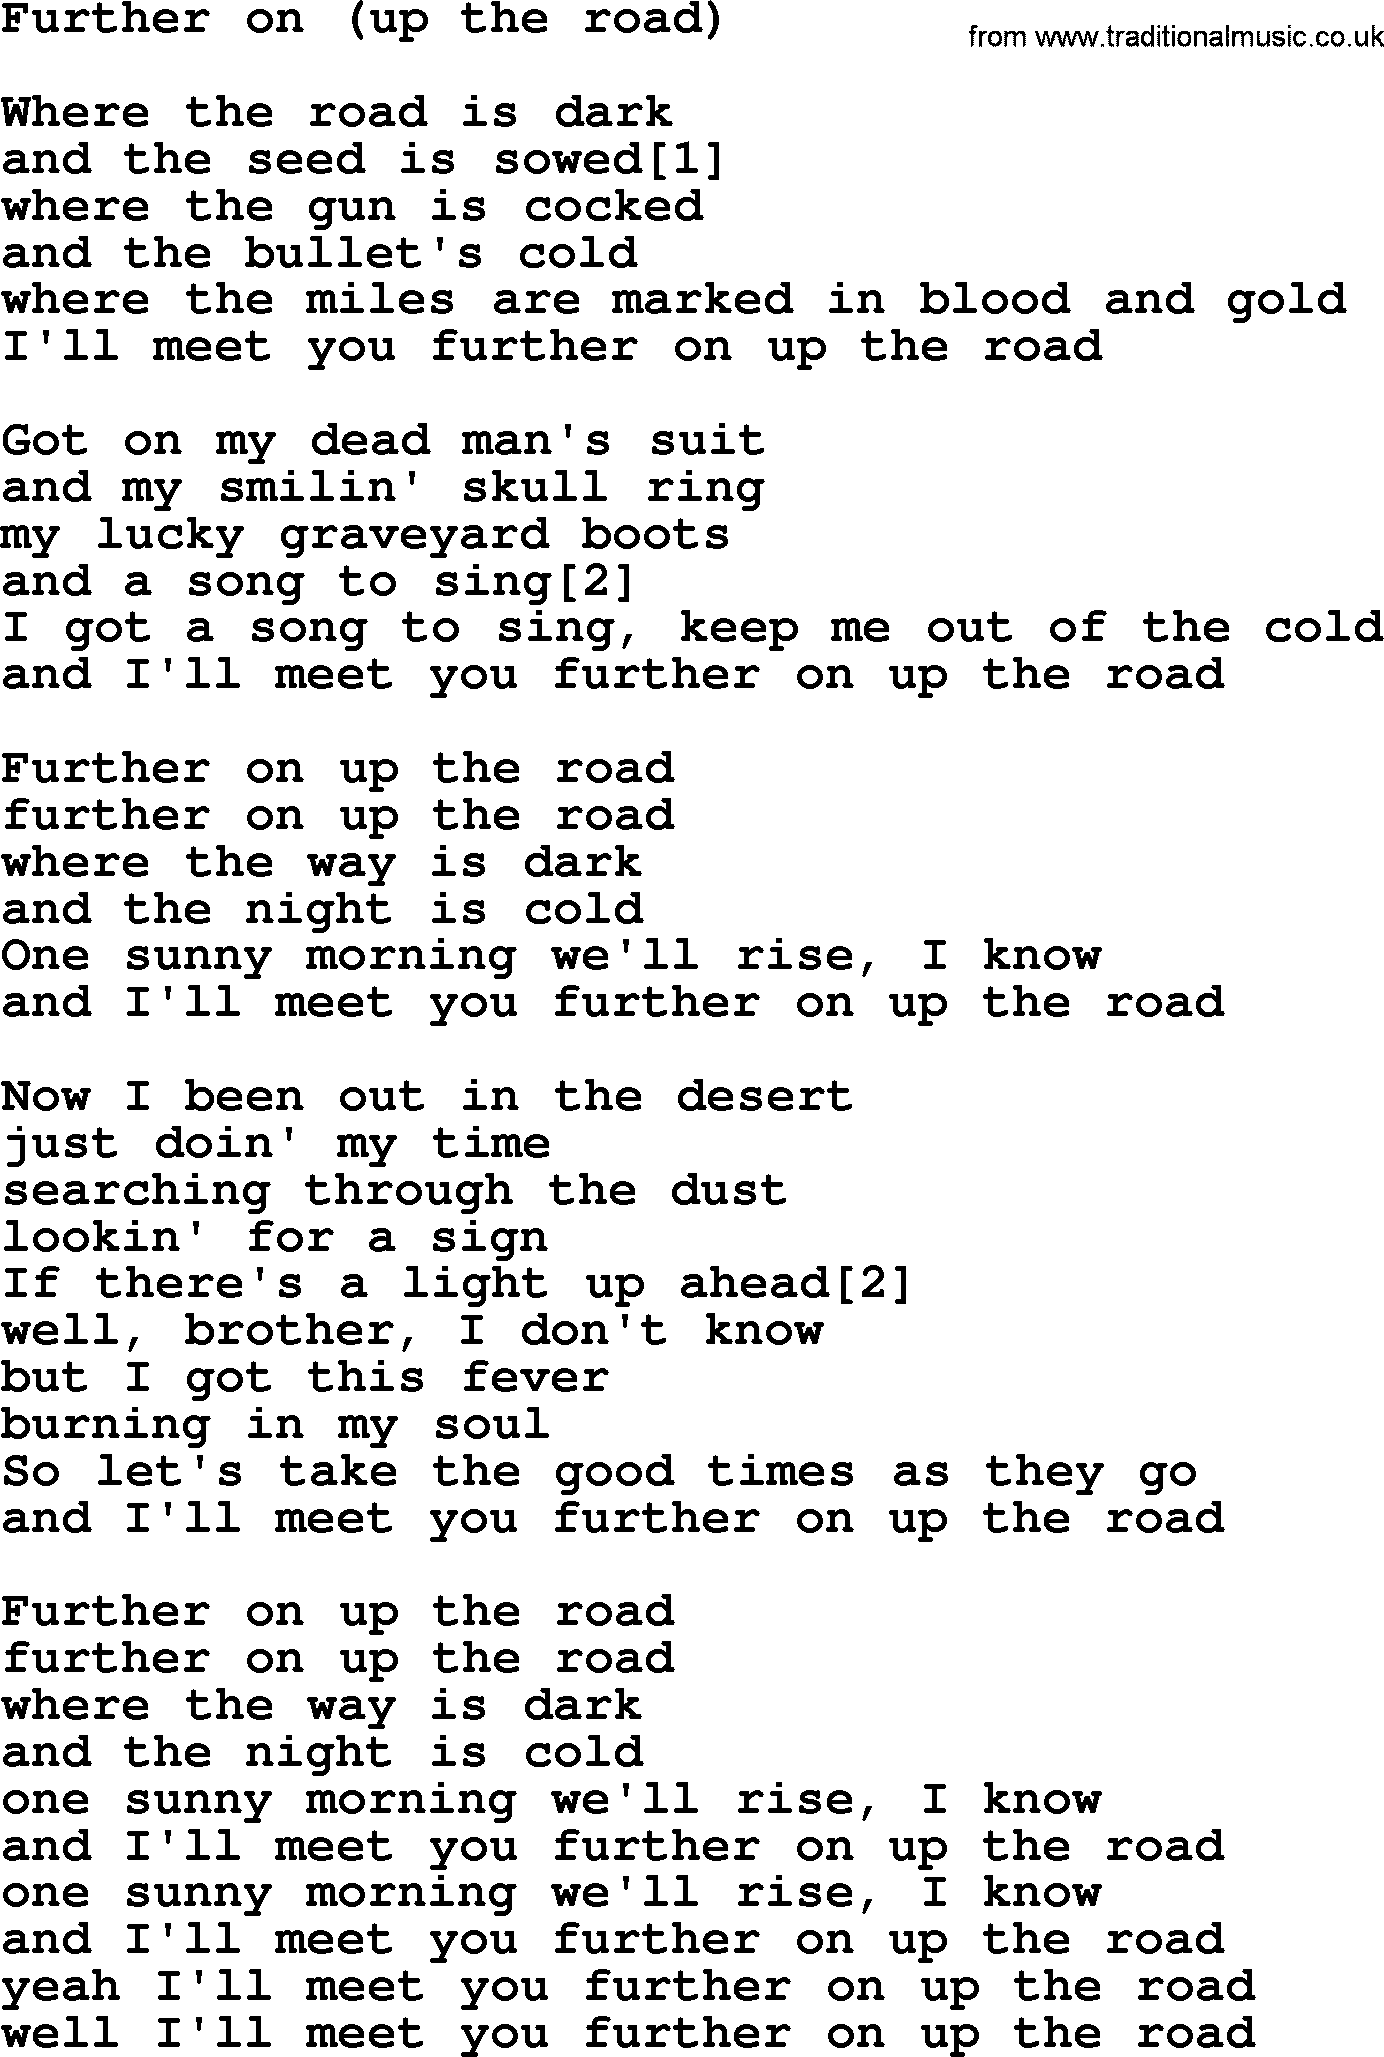 Bruce Springsteen song: Further On(Up The Road) lyrics